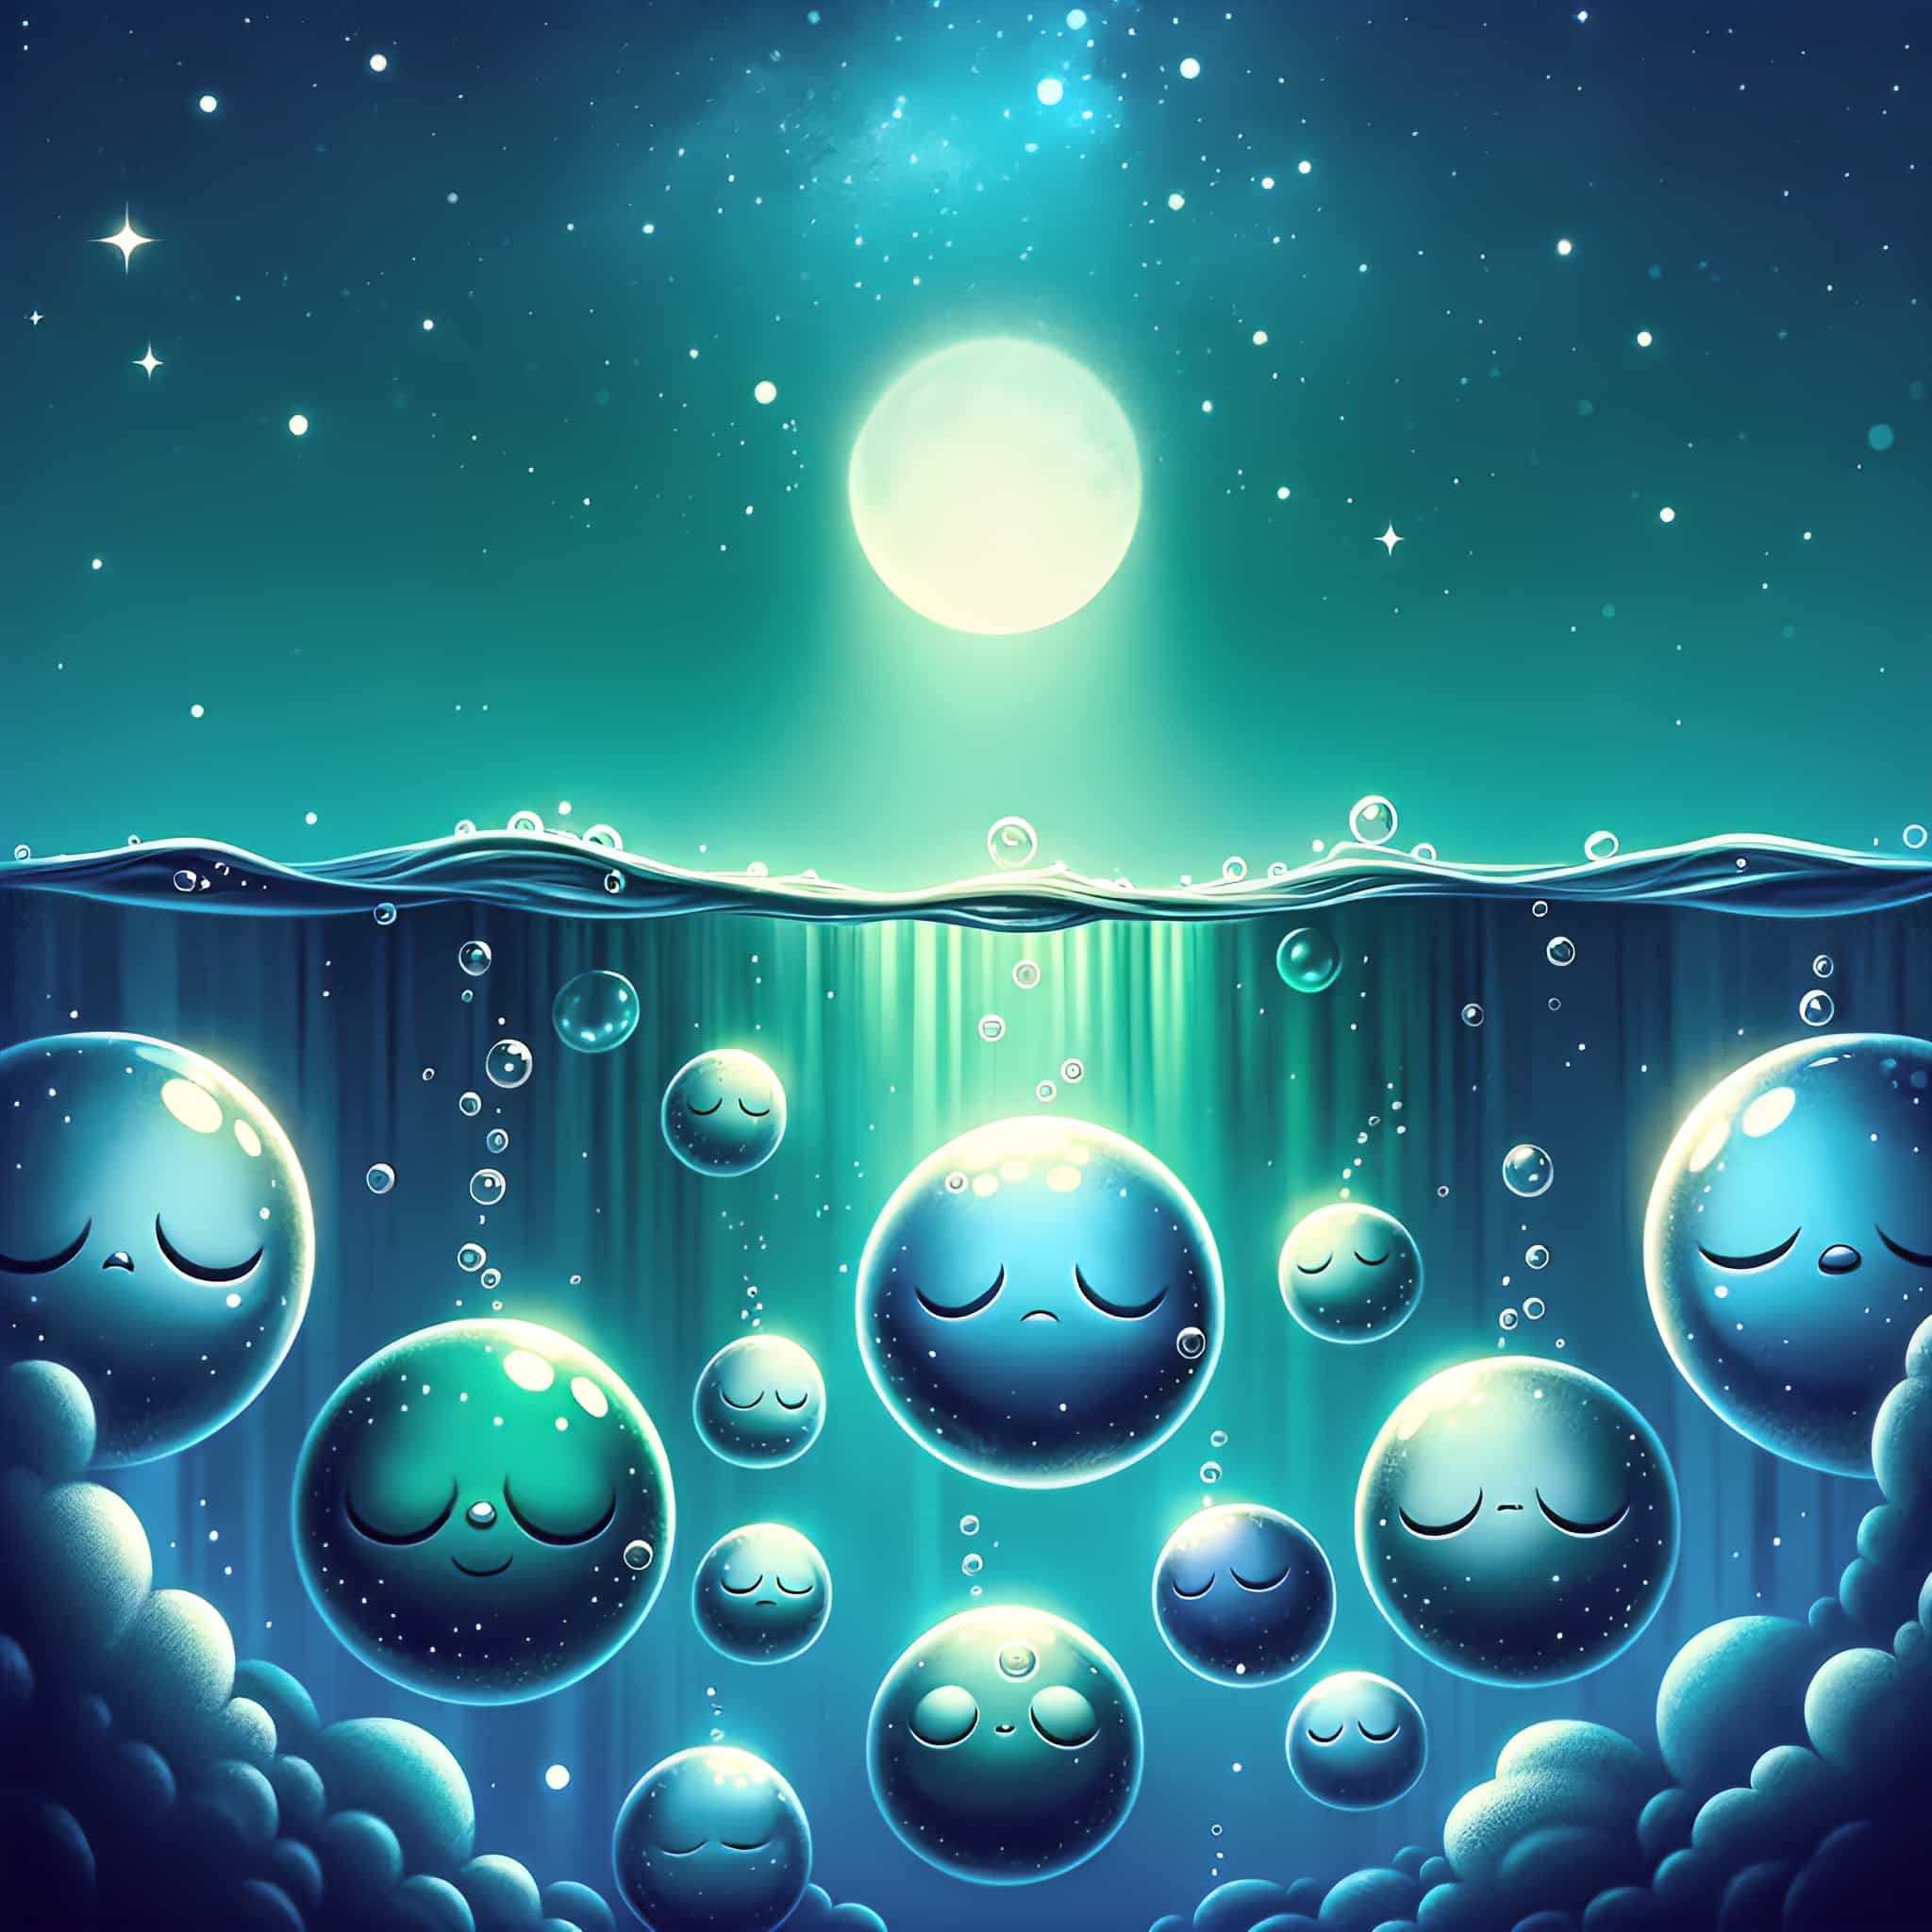 quiescence-featured sleeping moons floating in water with bubbles